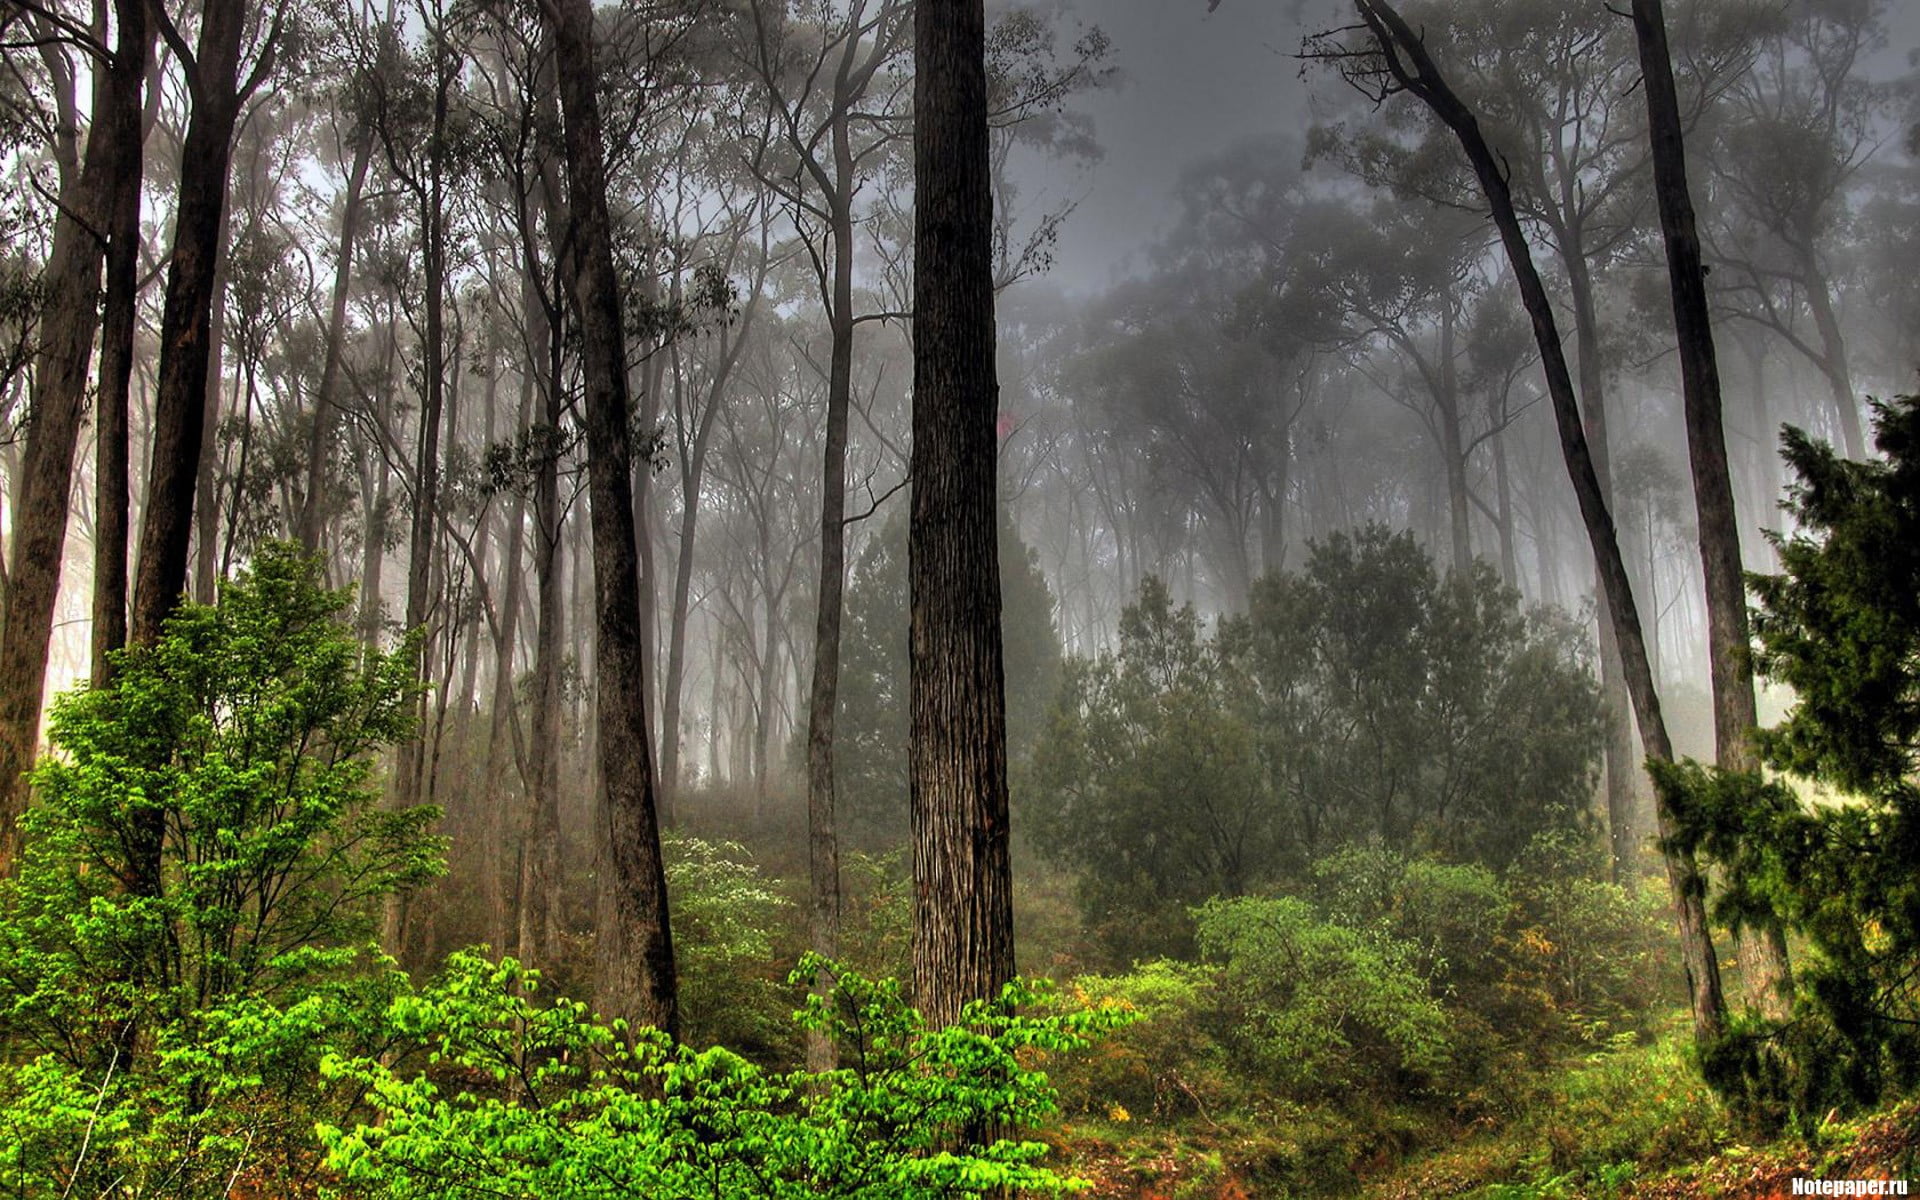 forest, mist, trees, nature, landscape, plant, growth, beauty in nature